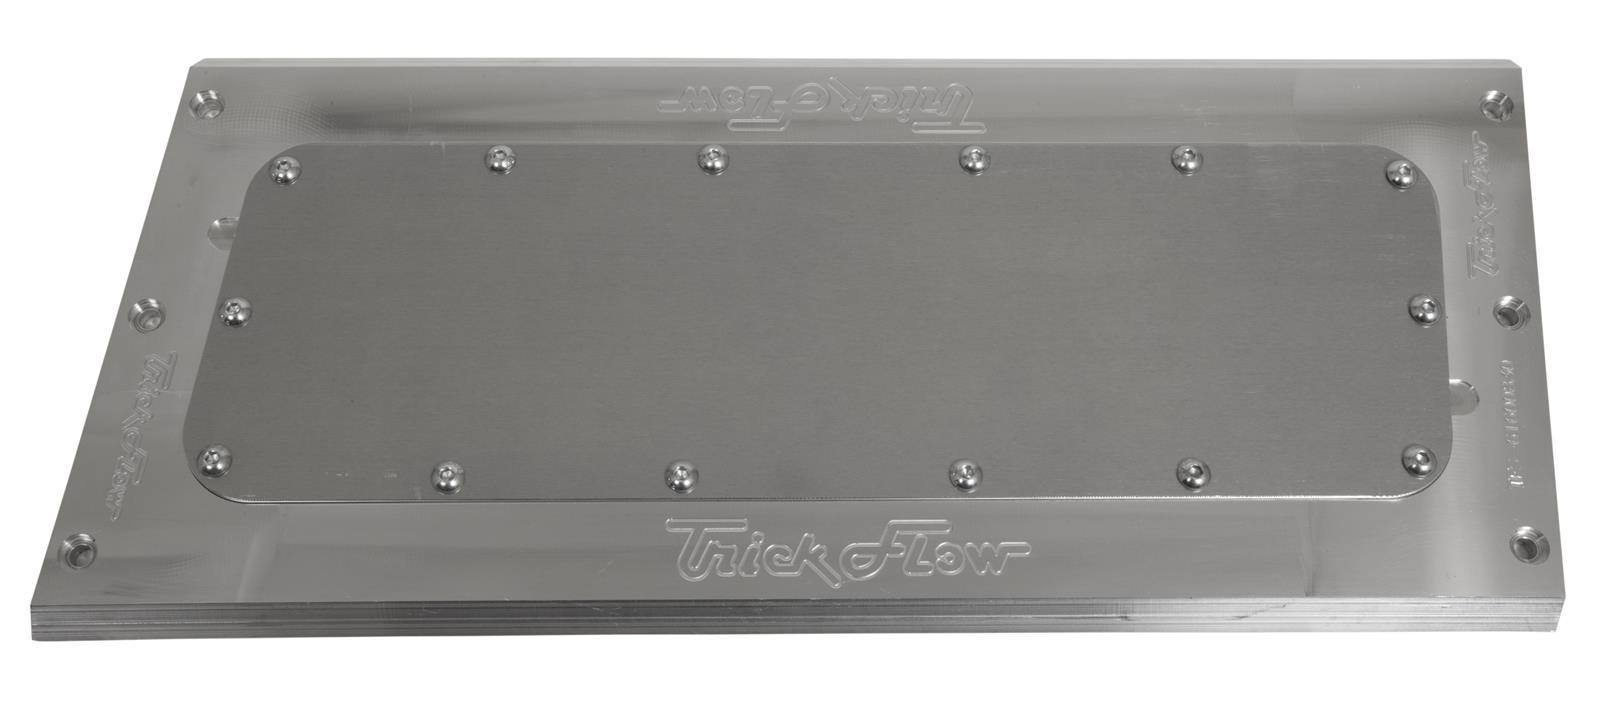 T1C Fully Loaded Double-sided Pot Vias Edition